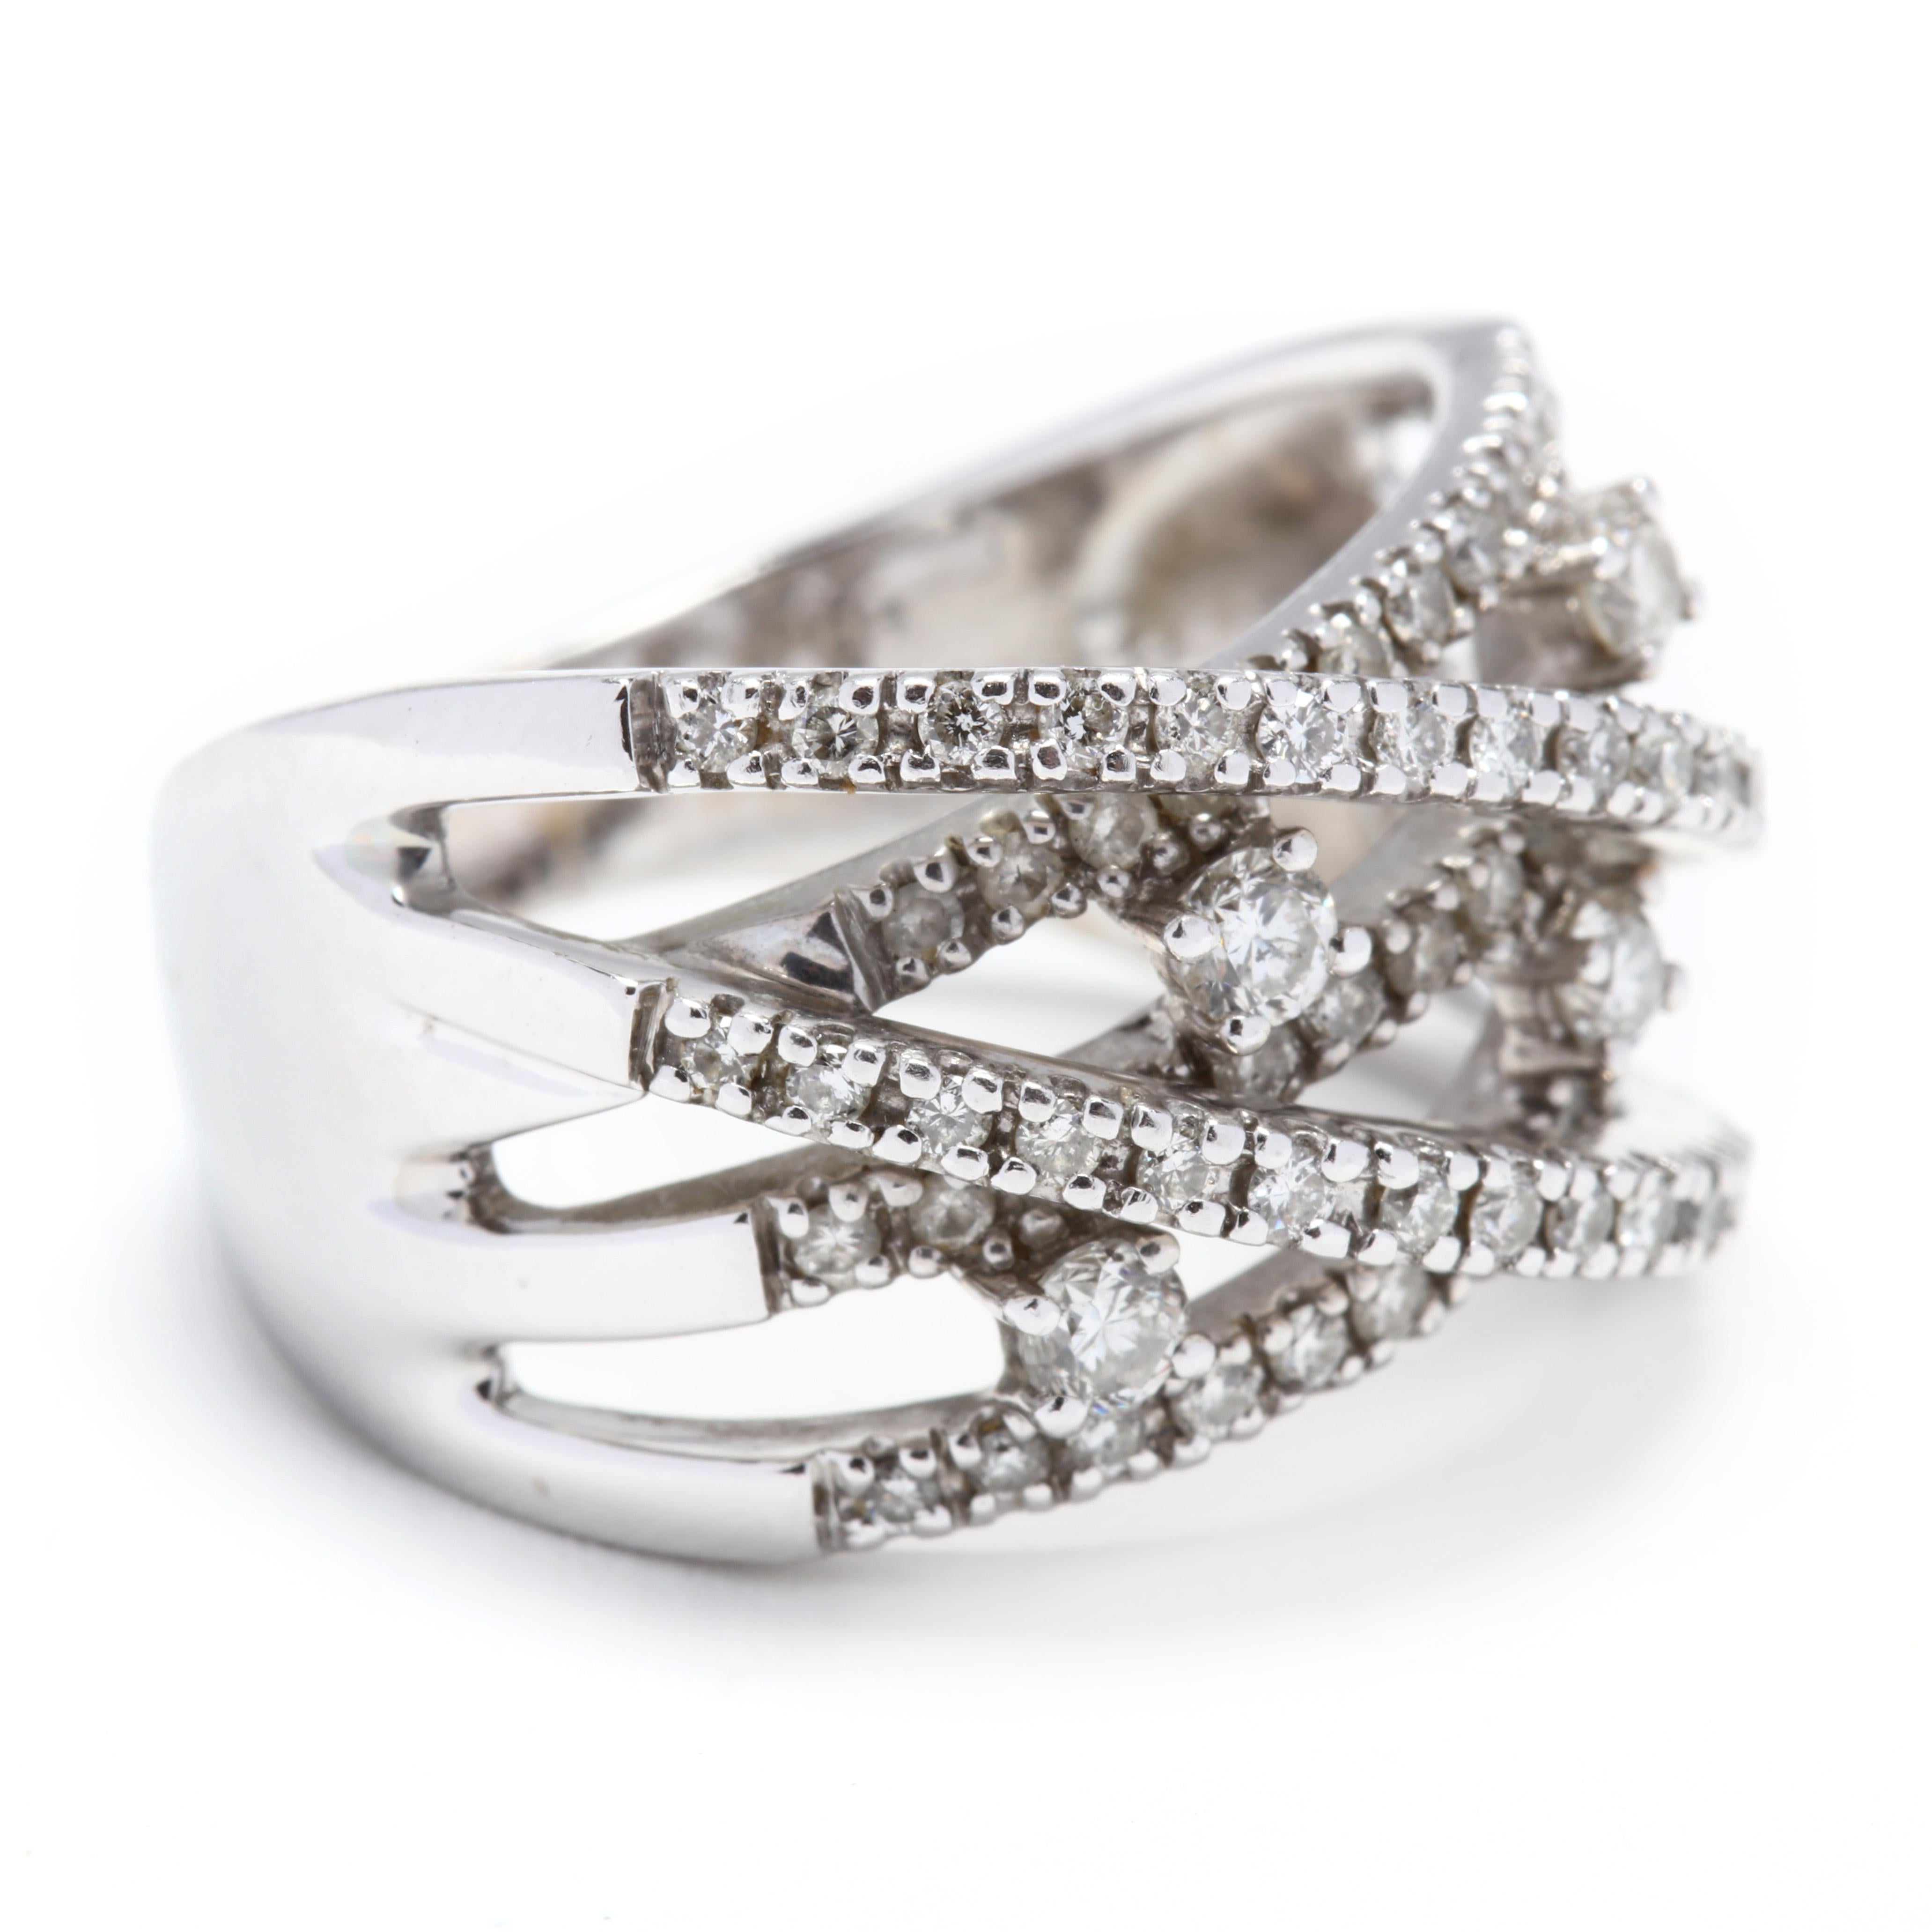 14k white gold and diamond criss cross wide band. A great statement ring! This piece would make a lovely wedding, anniversary or right hand band! It has five bands of white gold set with diamonds that cross over in different directions and four,